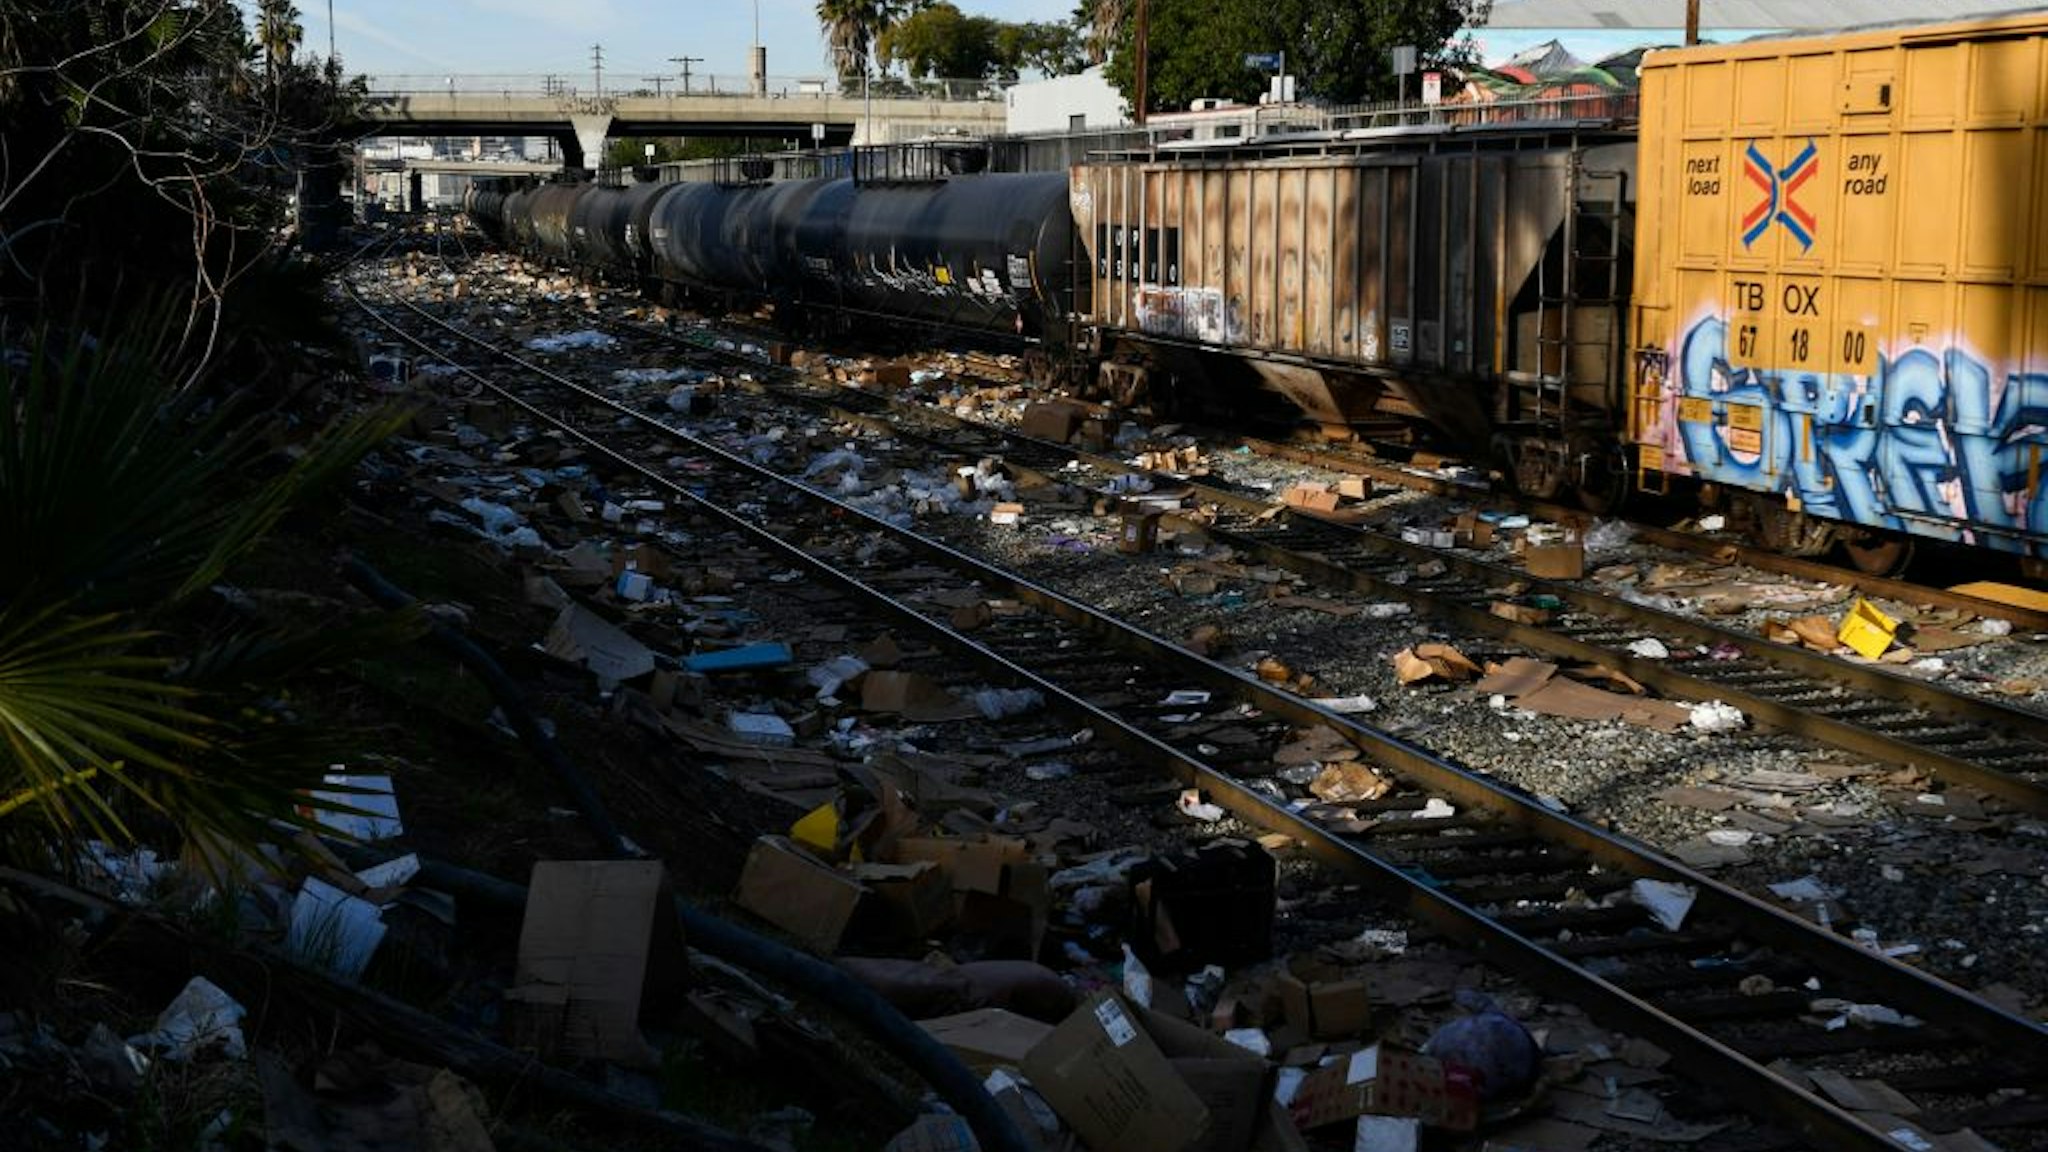 A section of Union Pacific train tracks littered with thousands of opened boxes and packages stolen from cargo shipping containers, targeted by thieves as the trains stop in downtown Los Angeles, California on January 14, 2022.